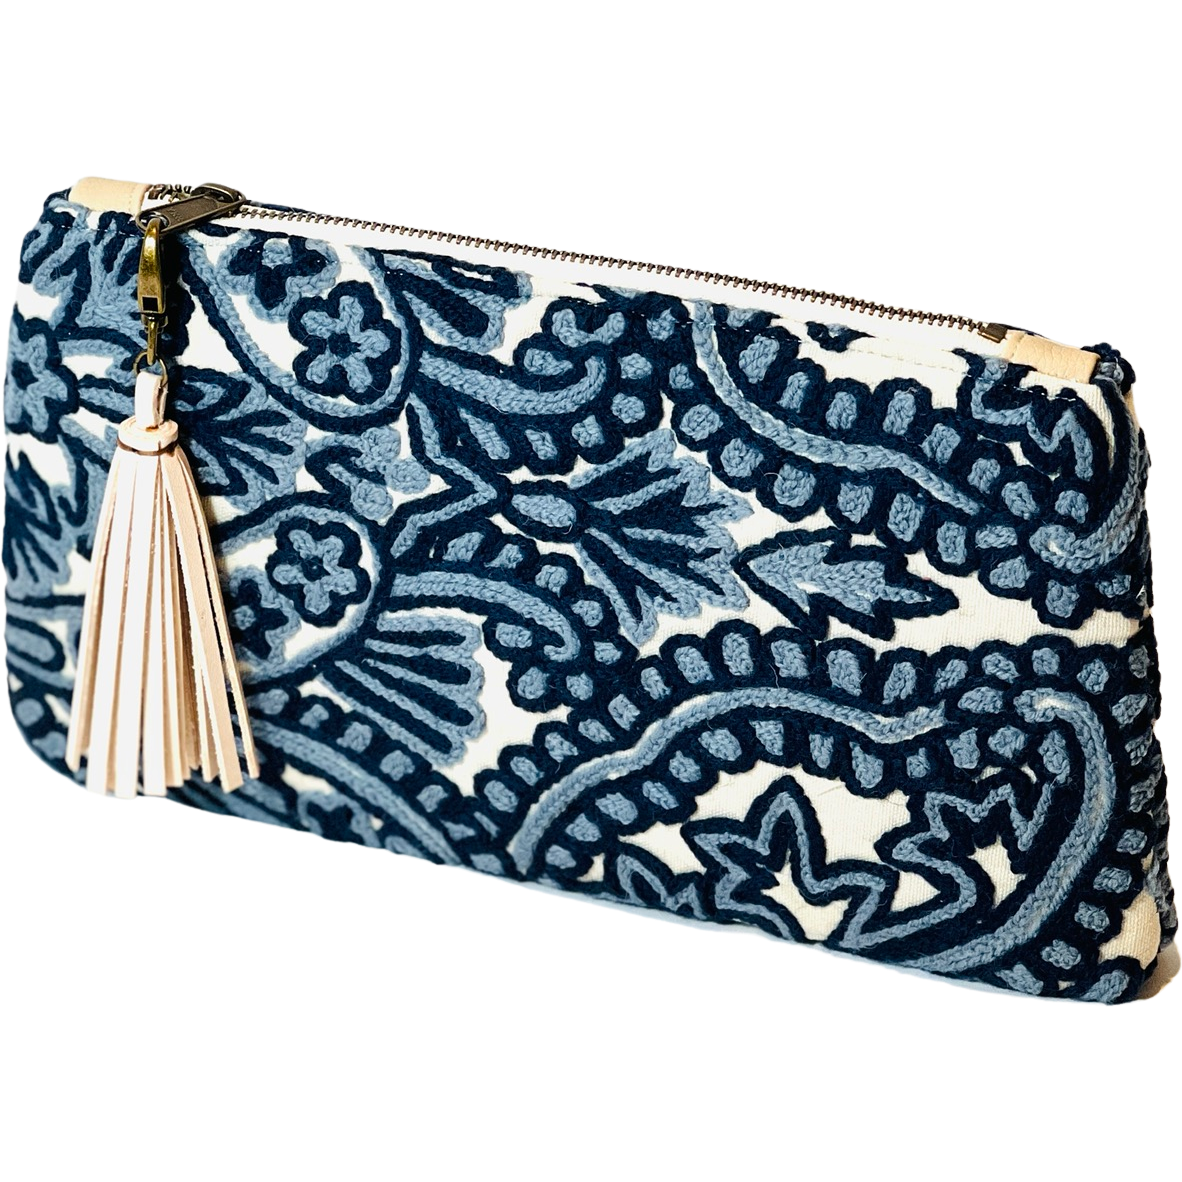 Navy Embroidered Clutch